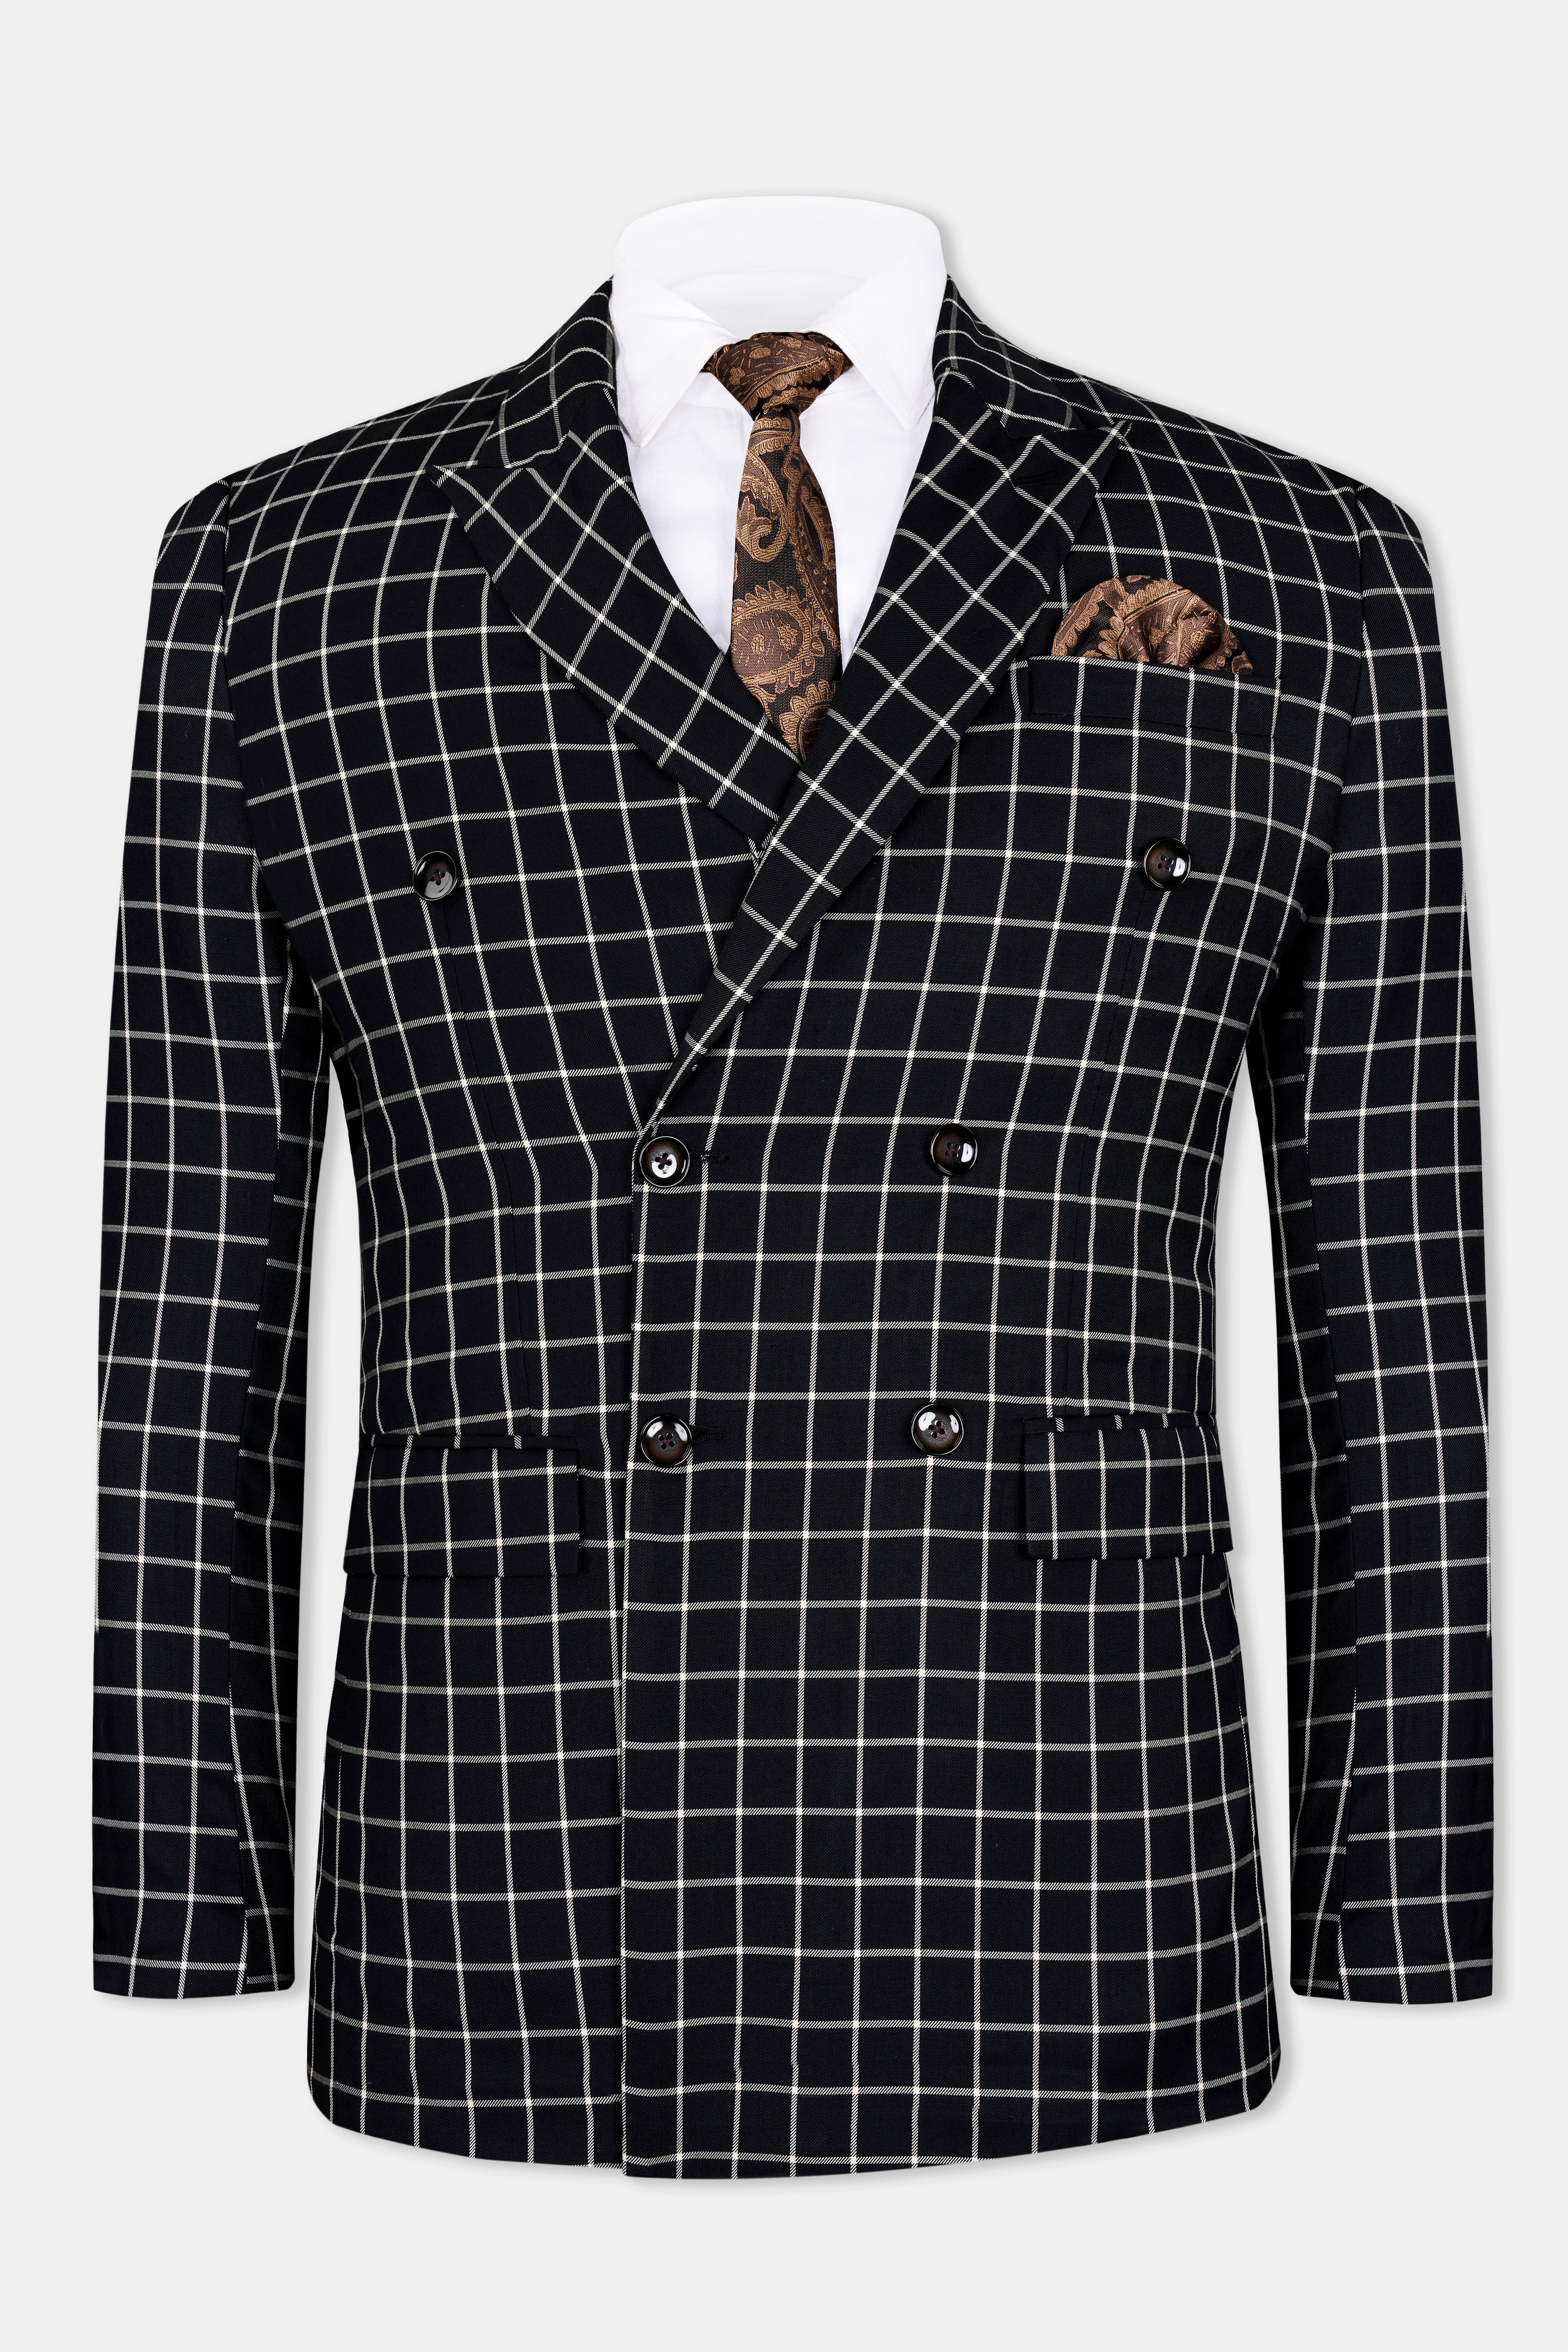 Jade Black and White Checkered Wool Rich Double Breasted Suit ST2932-DB-36, ST2932-DB-38, ST2932-DB-40, ST2932-DB-42, ST2932-DB-44, ST2932-DB-46, ST2932-DB-48, ST2932-DB-50, ST2932-DB-52, ST2932-DB-54, ST2932-DB-56, ST2932-DB-58, ST2932-DB-60